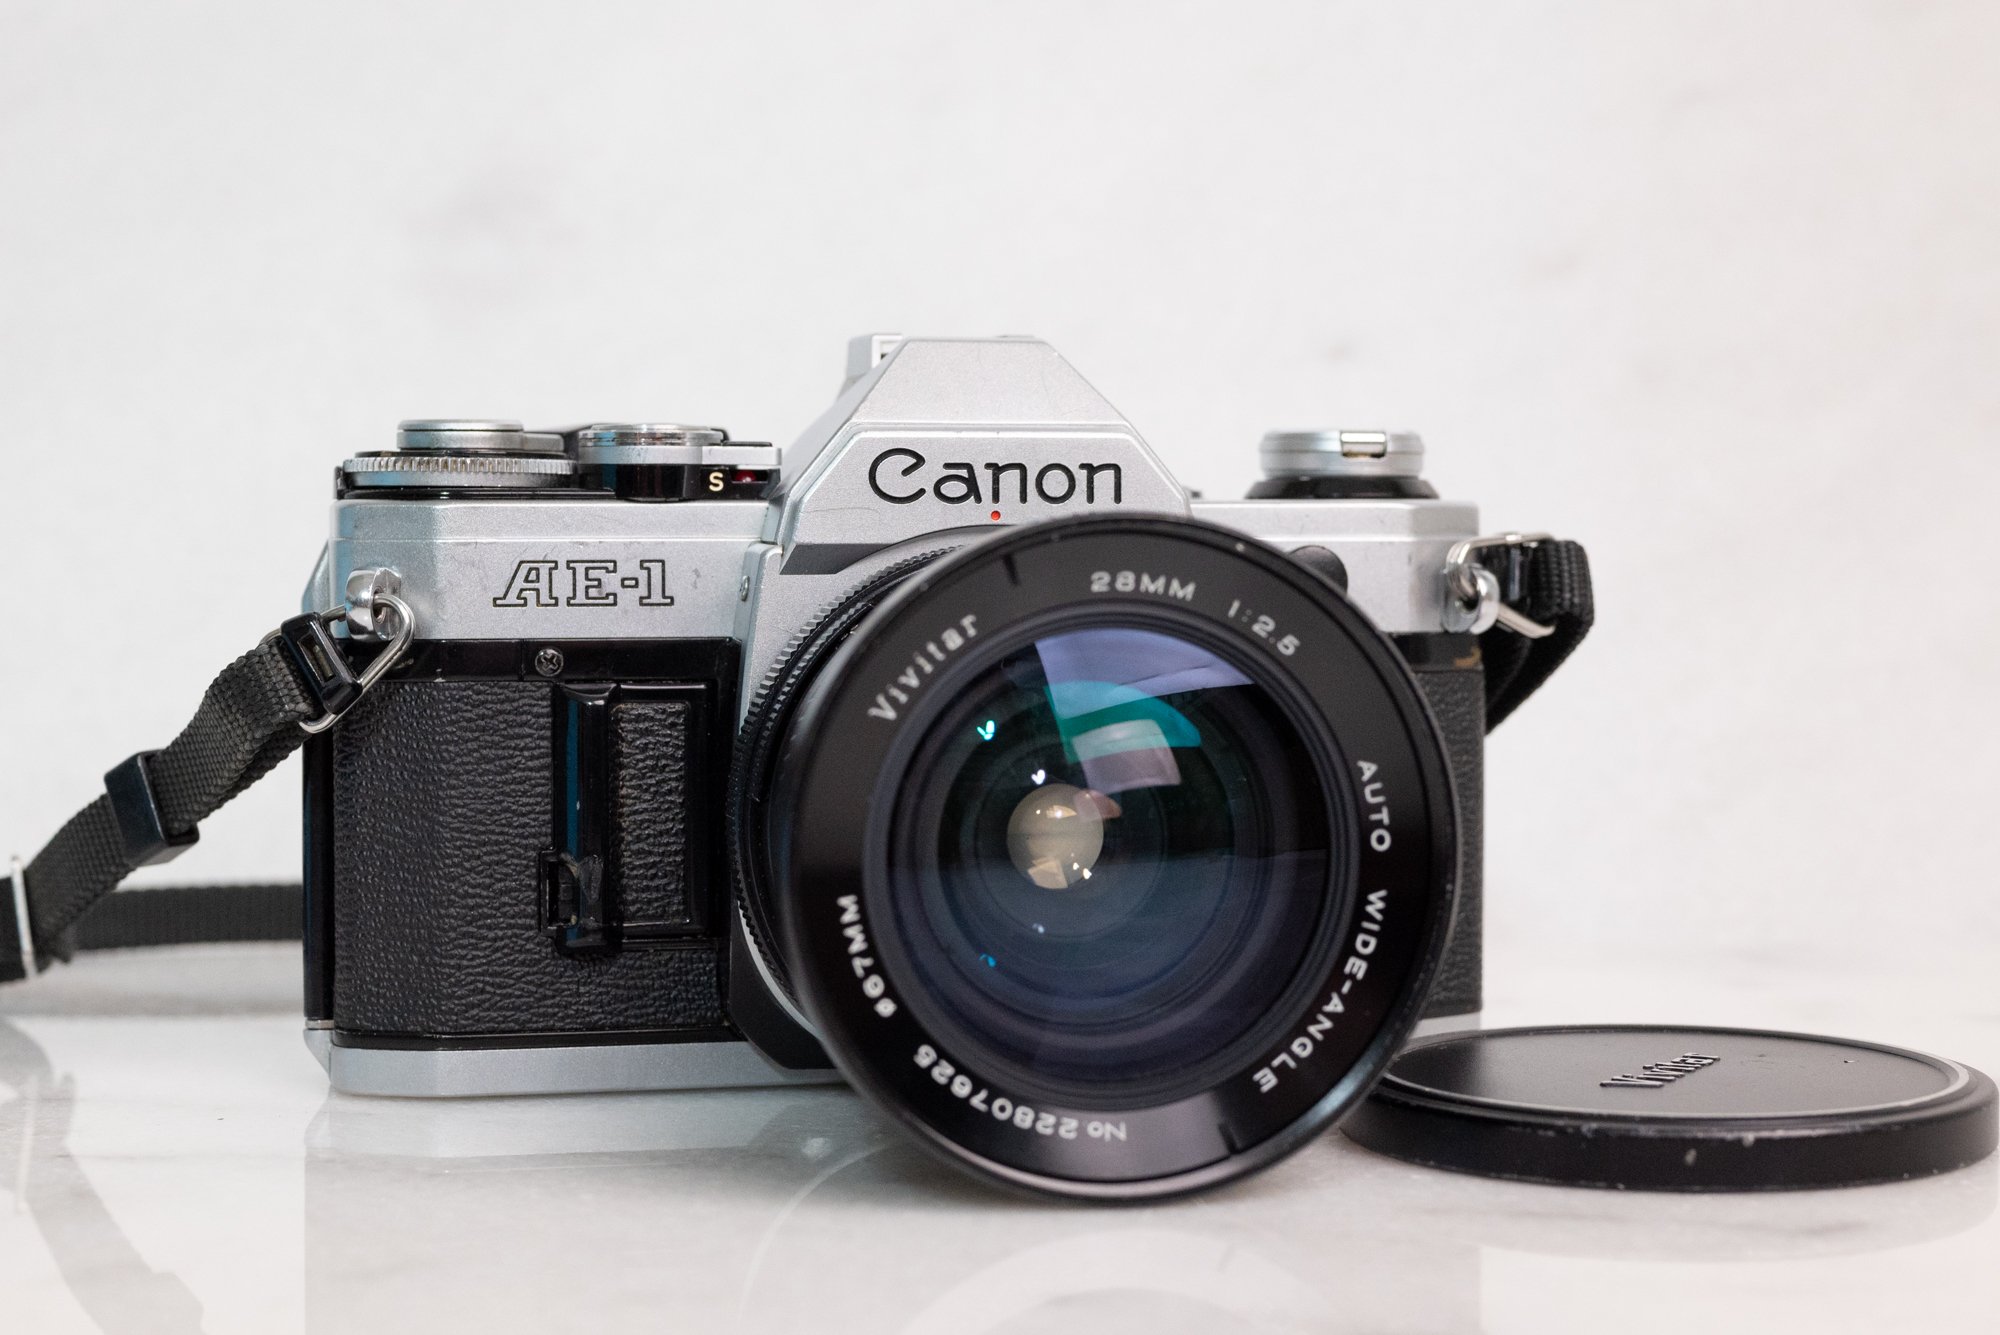 Canon AE-1 35mm Film SLR Camera with Canon FD 50mm F/1.8 Fast Prime Lens,  Cap, Strap and Battery — F Stop Cameras